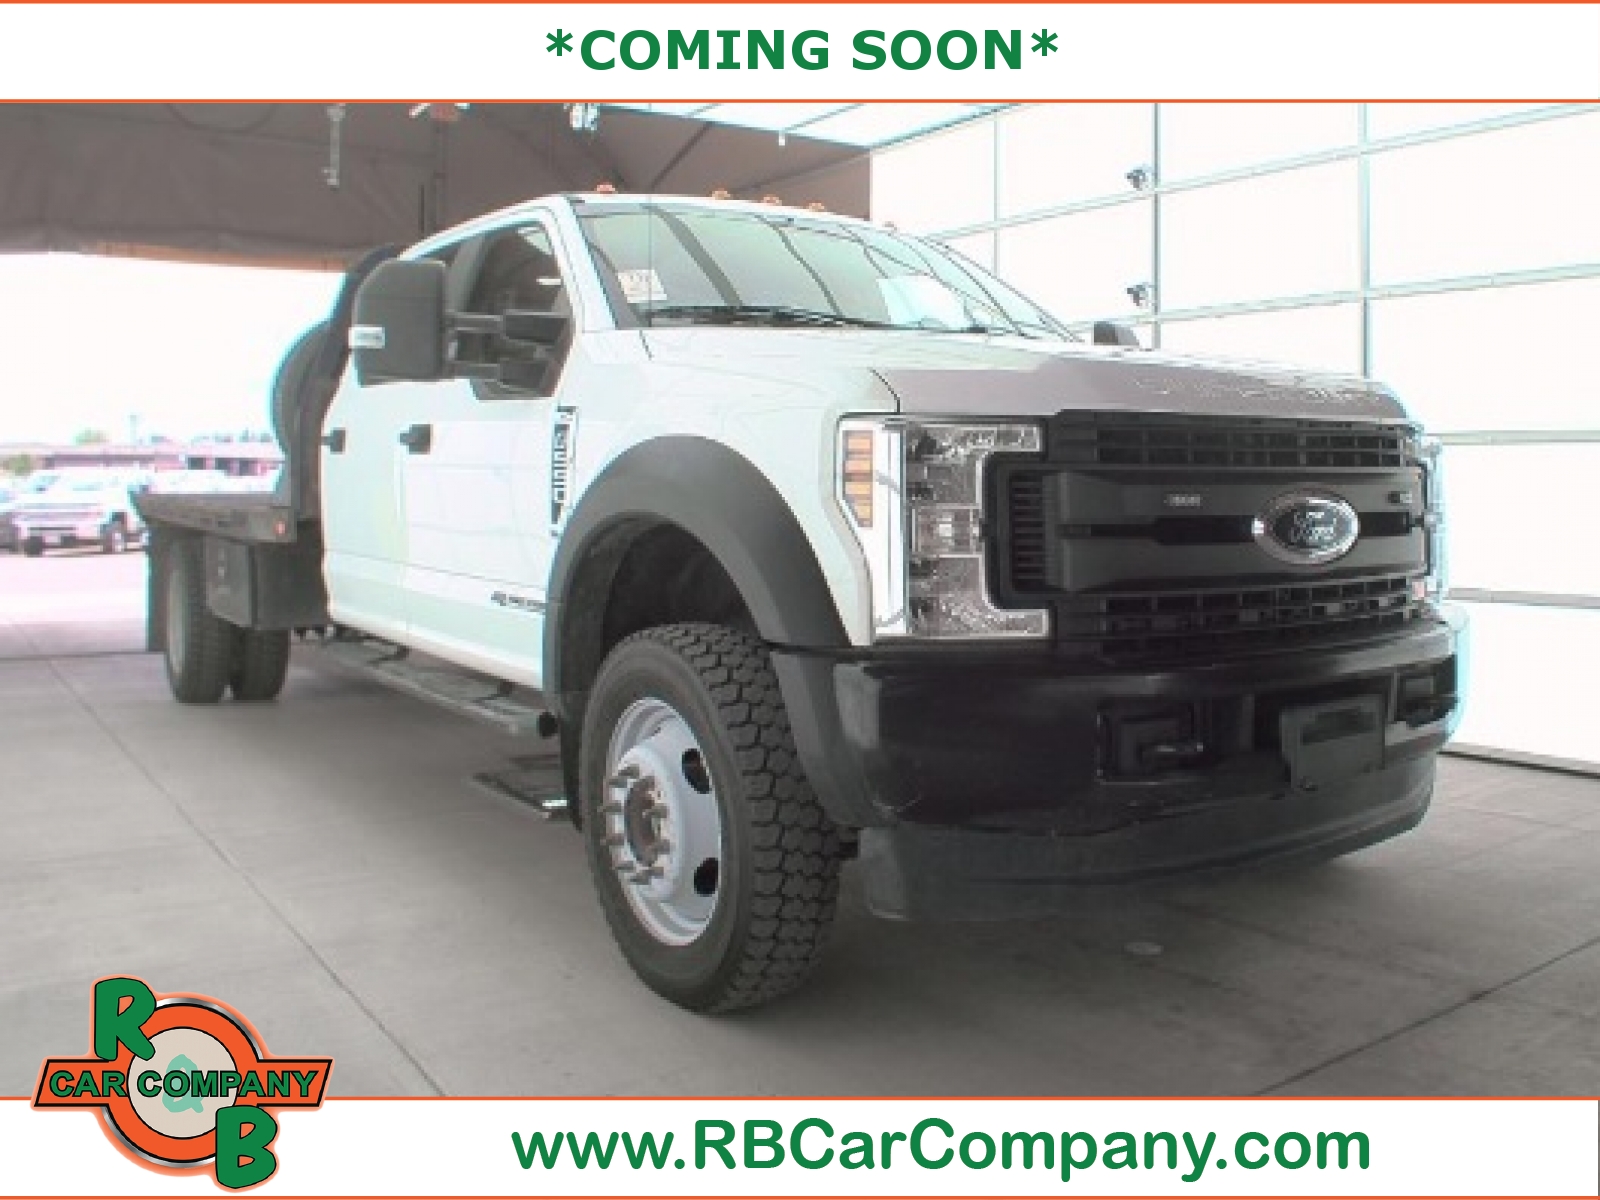 2019 Ford Super Duty F-550 DRW Chassis C XLT, 36837, Photo 1